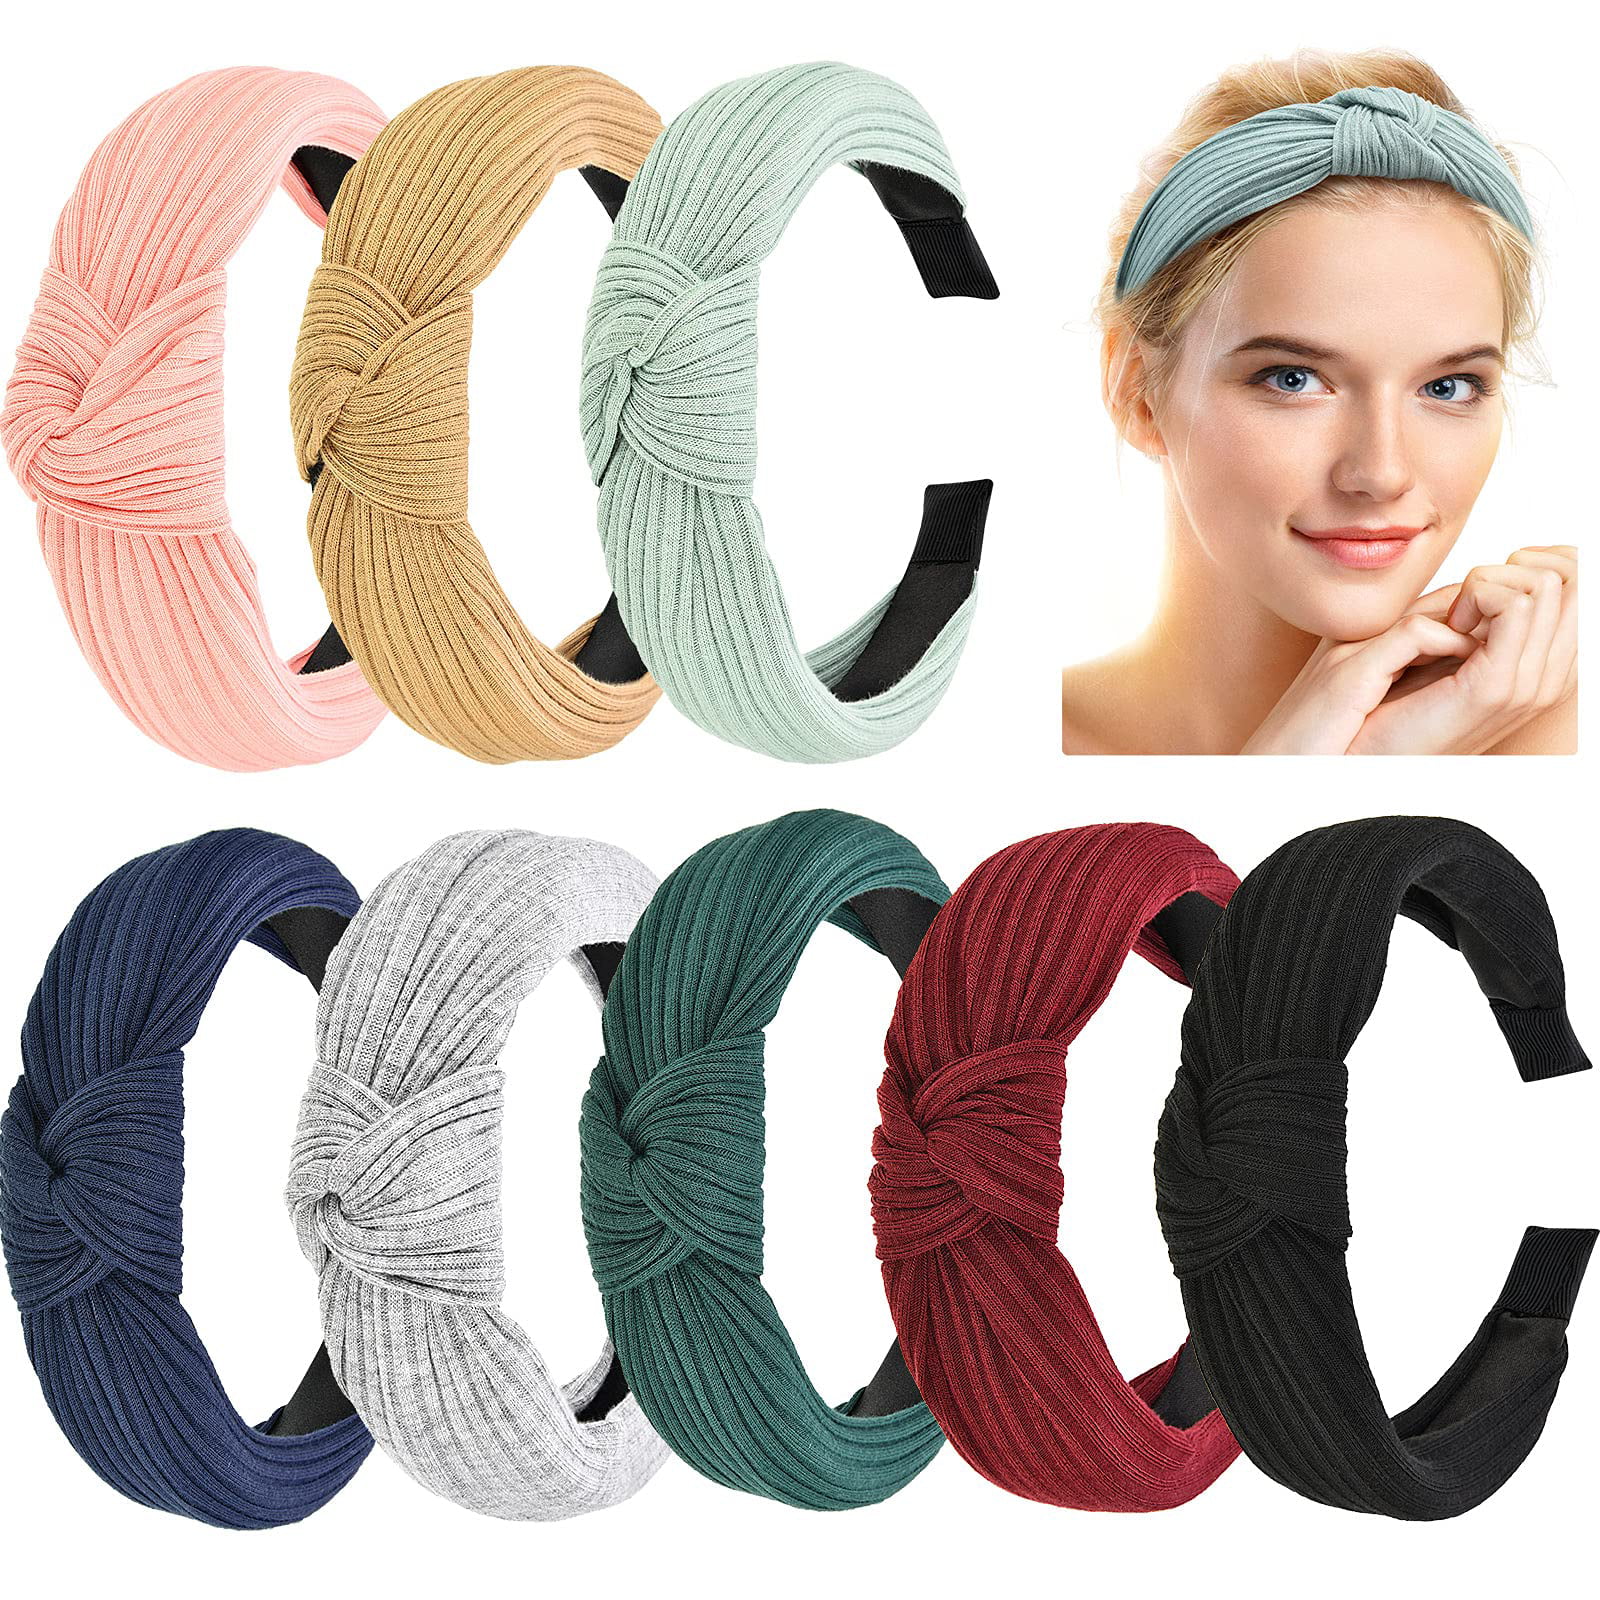 Hair Accessories Knotted Turban Yoga Headband Multicolored Knotted Wide Headband